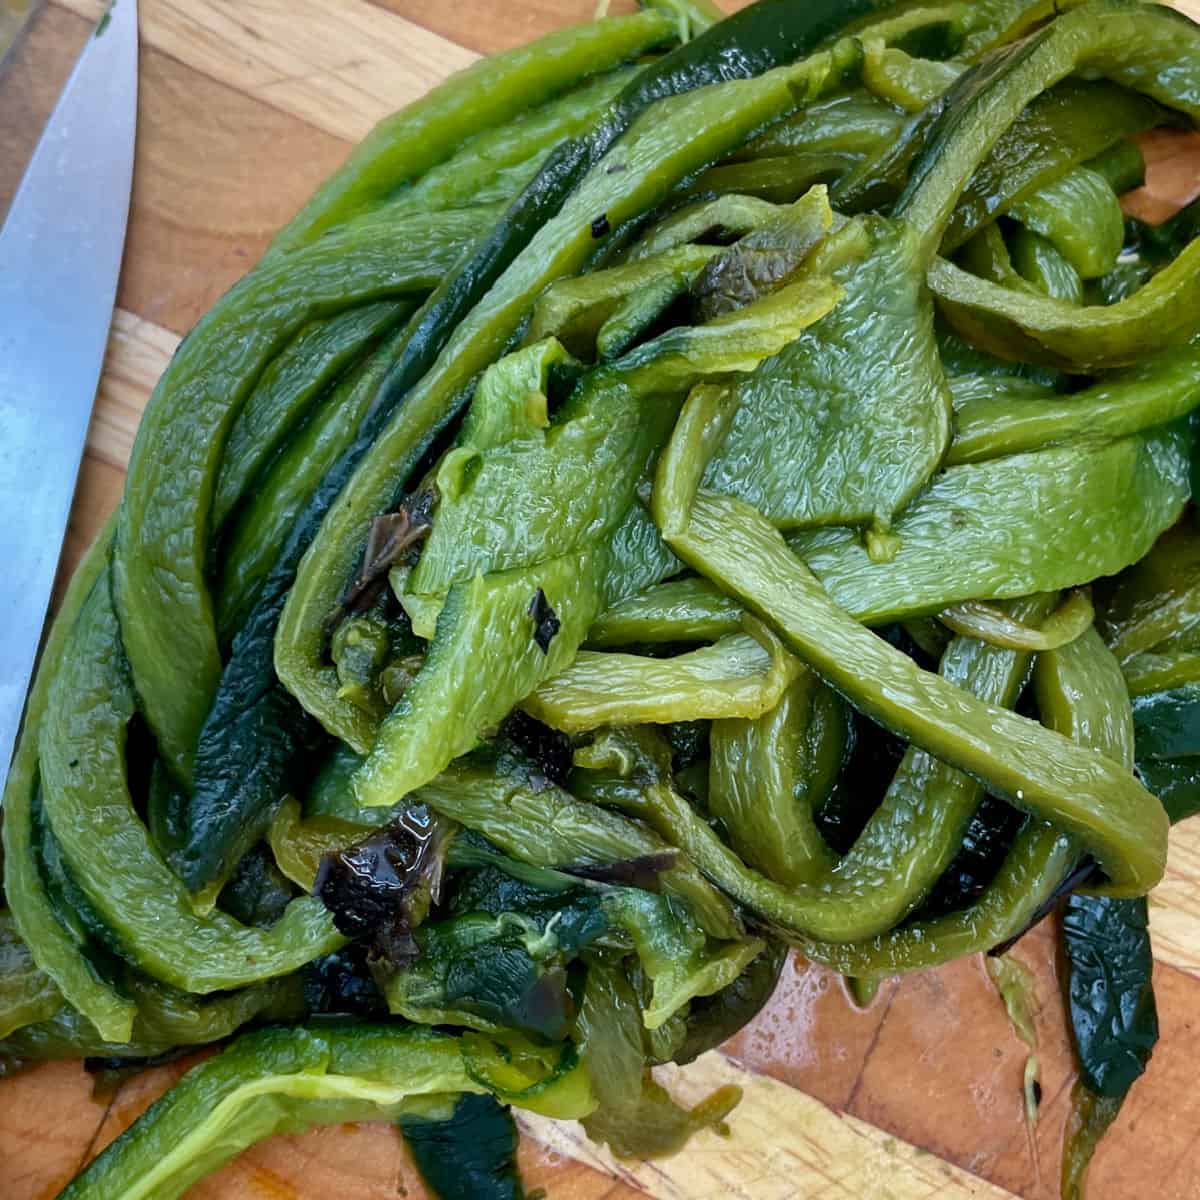 A pile of sliced peeled and cleaned poblano peppers.